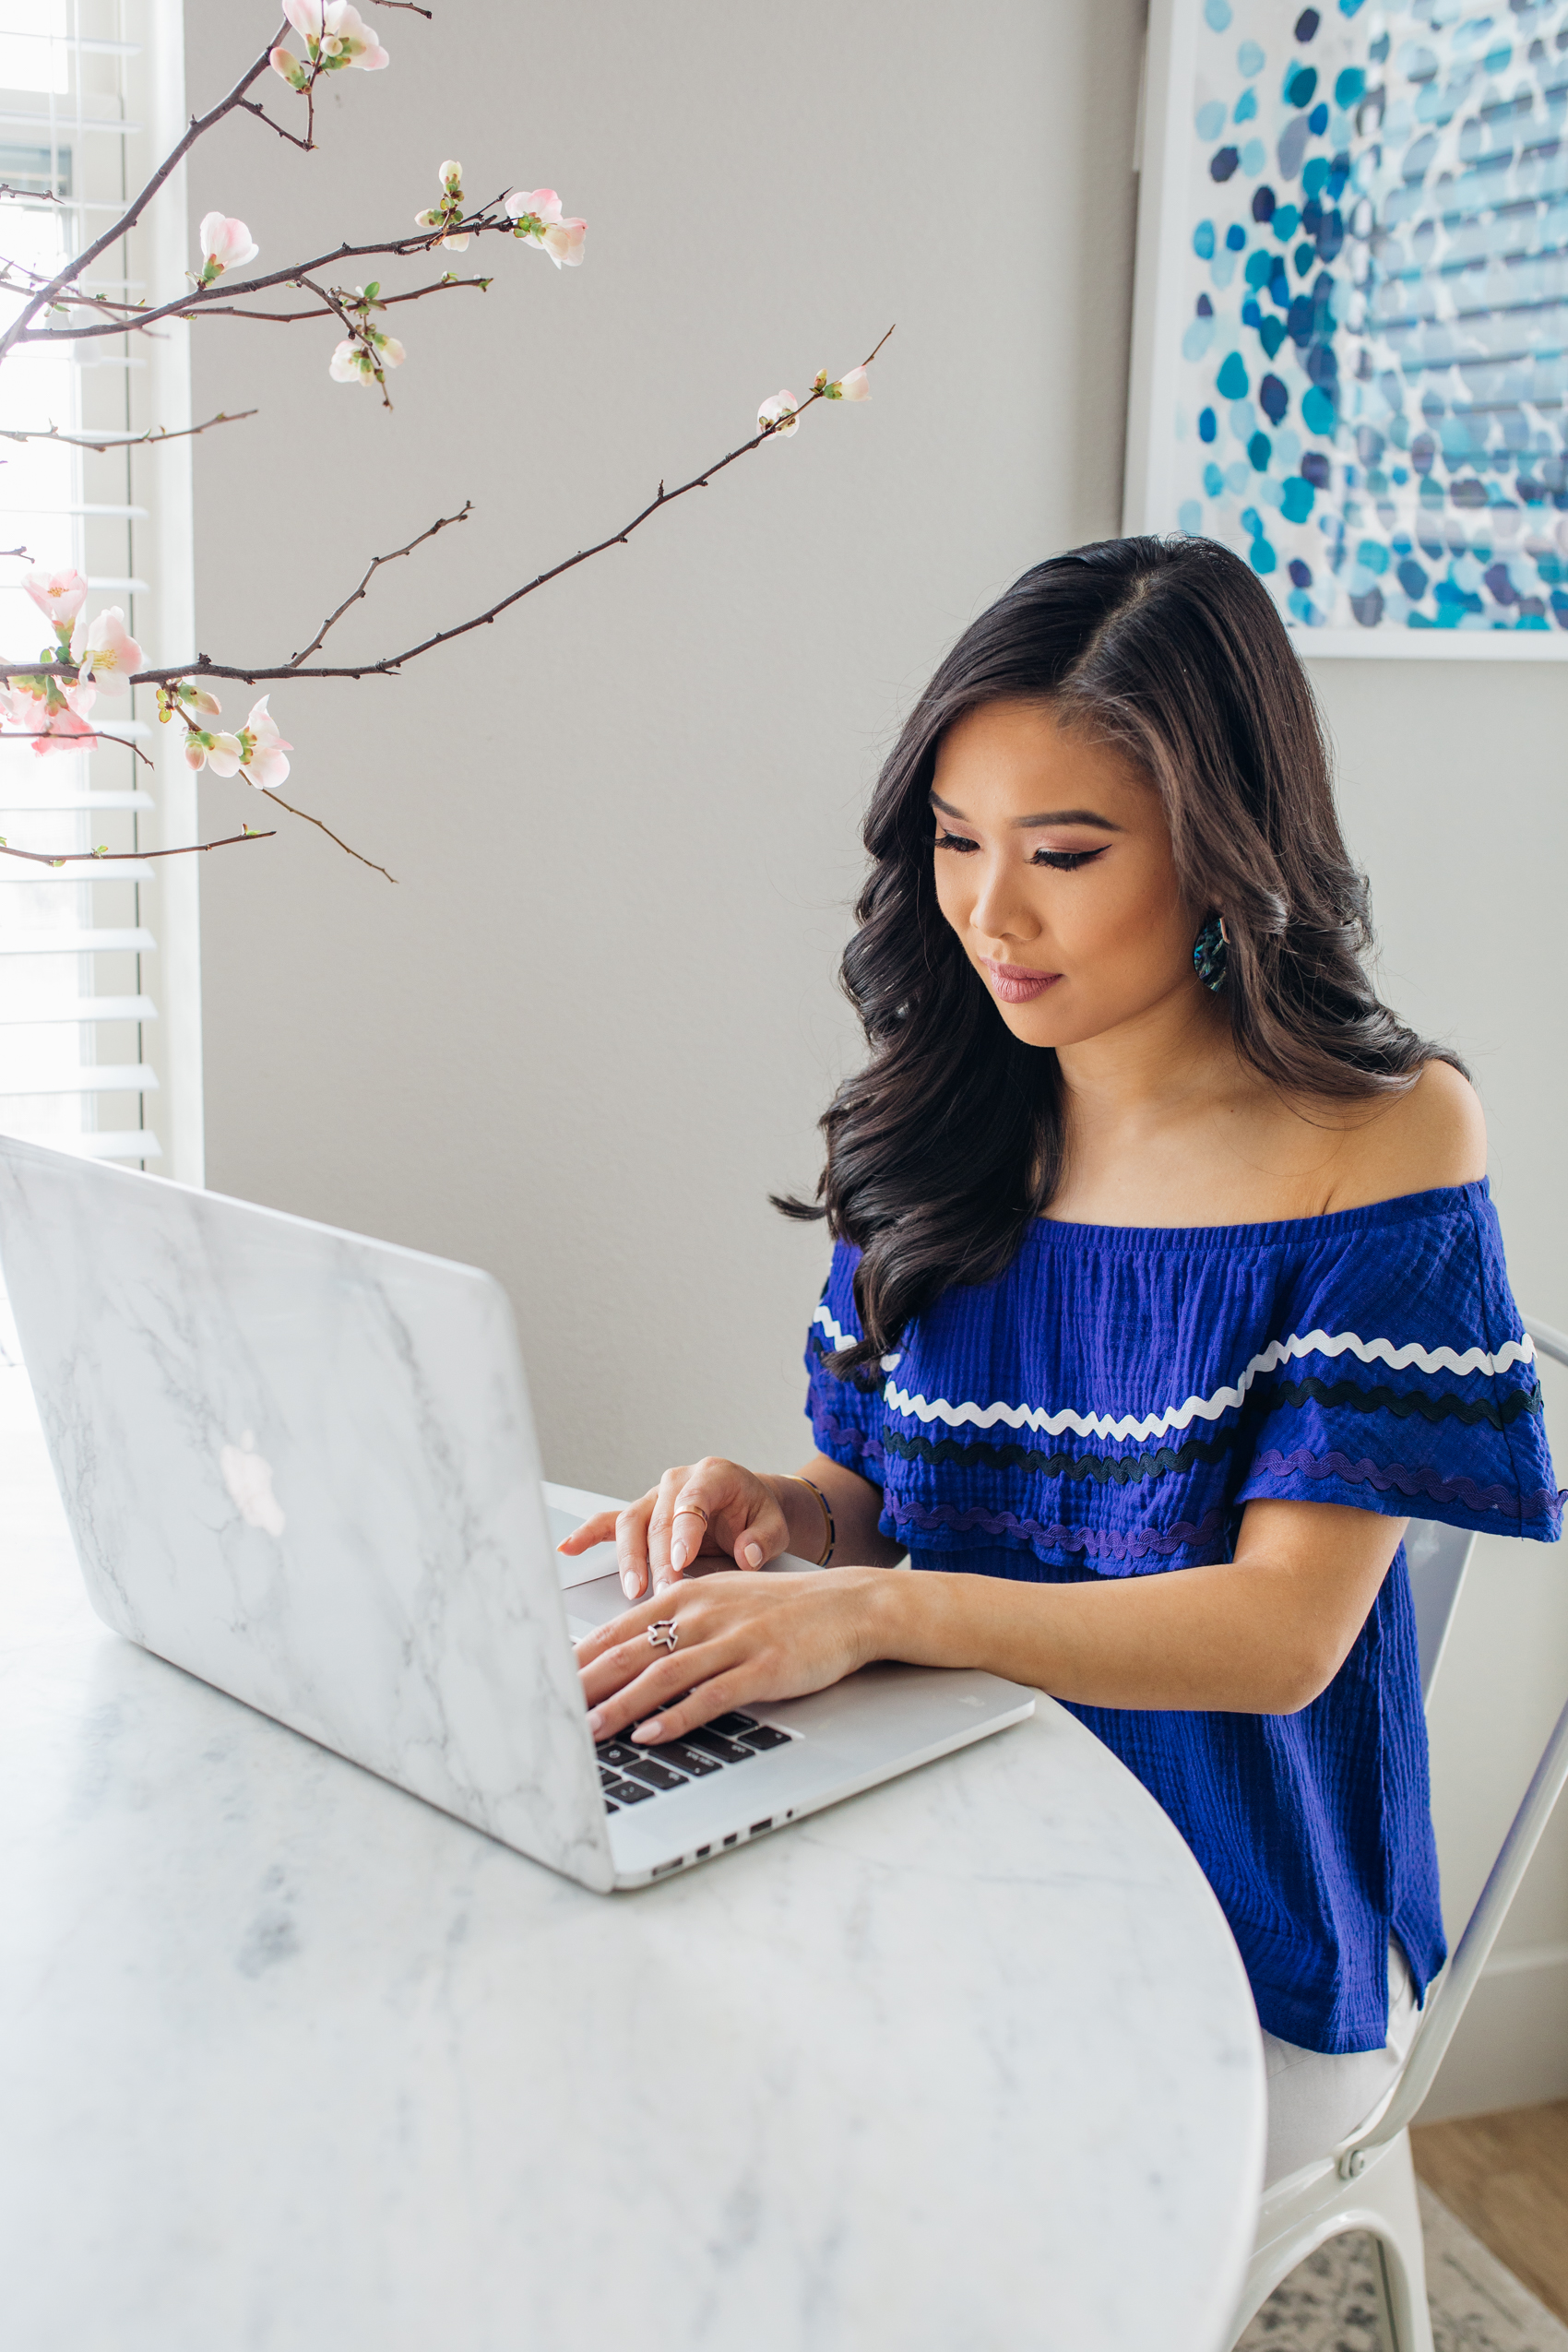 Blogger Hoang-Kim shares she'll be designing a top for the Gibson x International Women's Day Collection